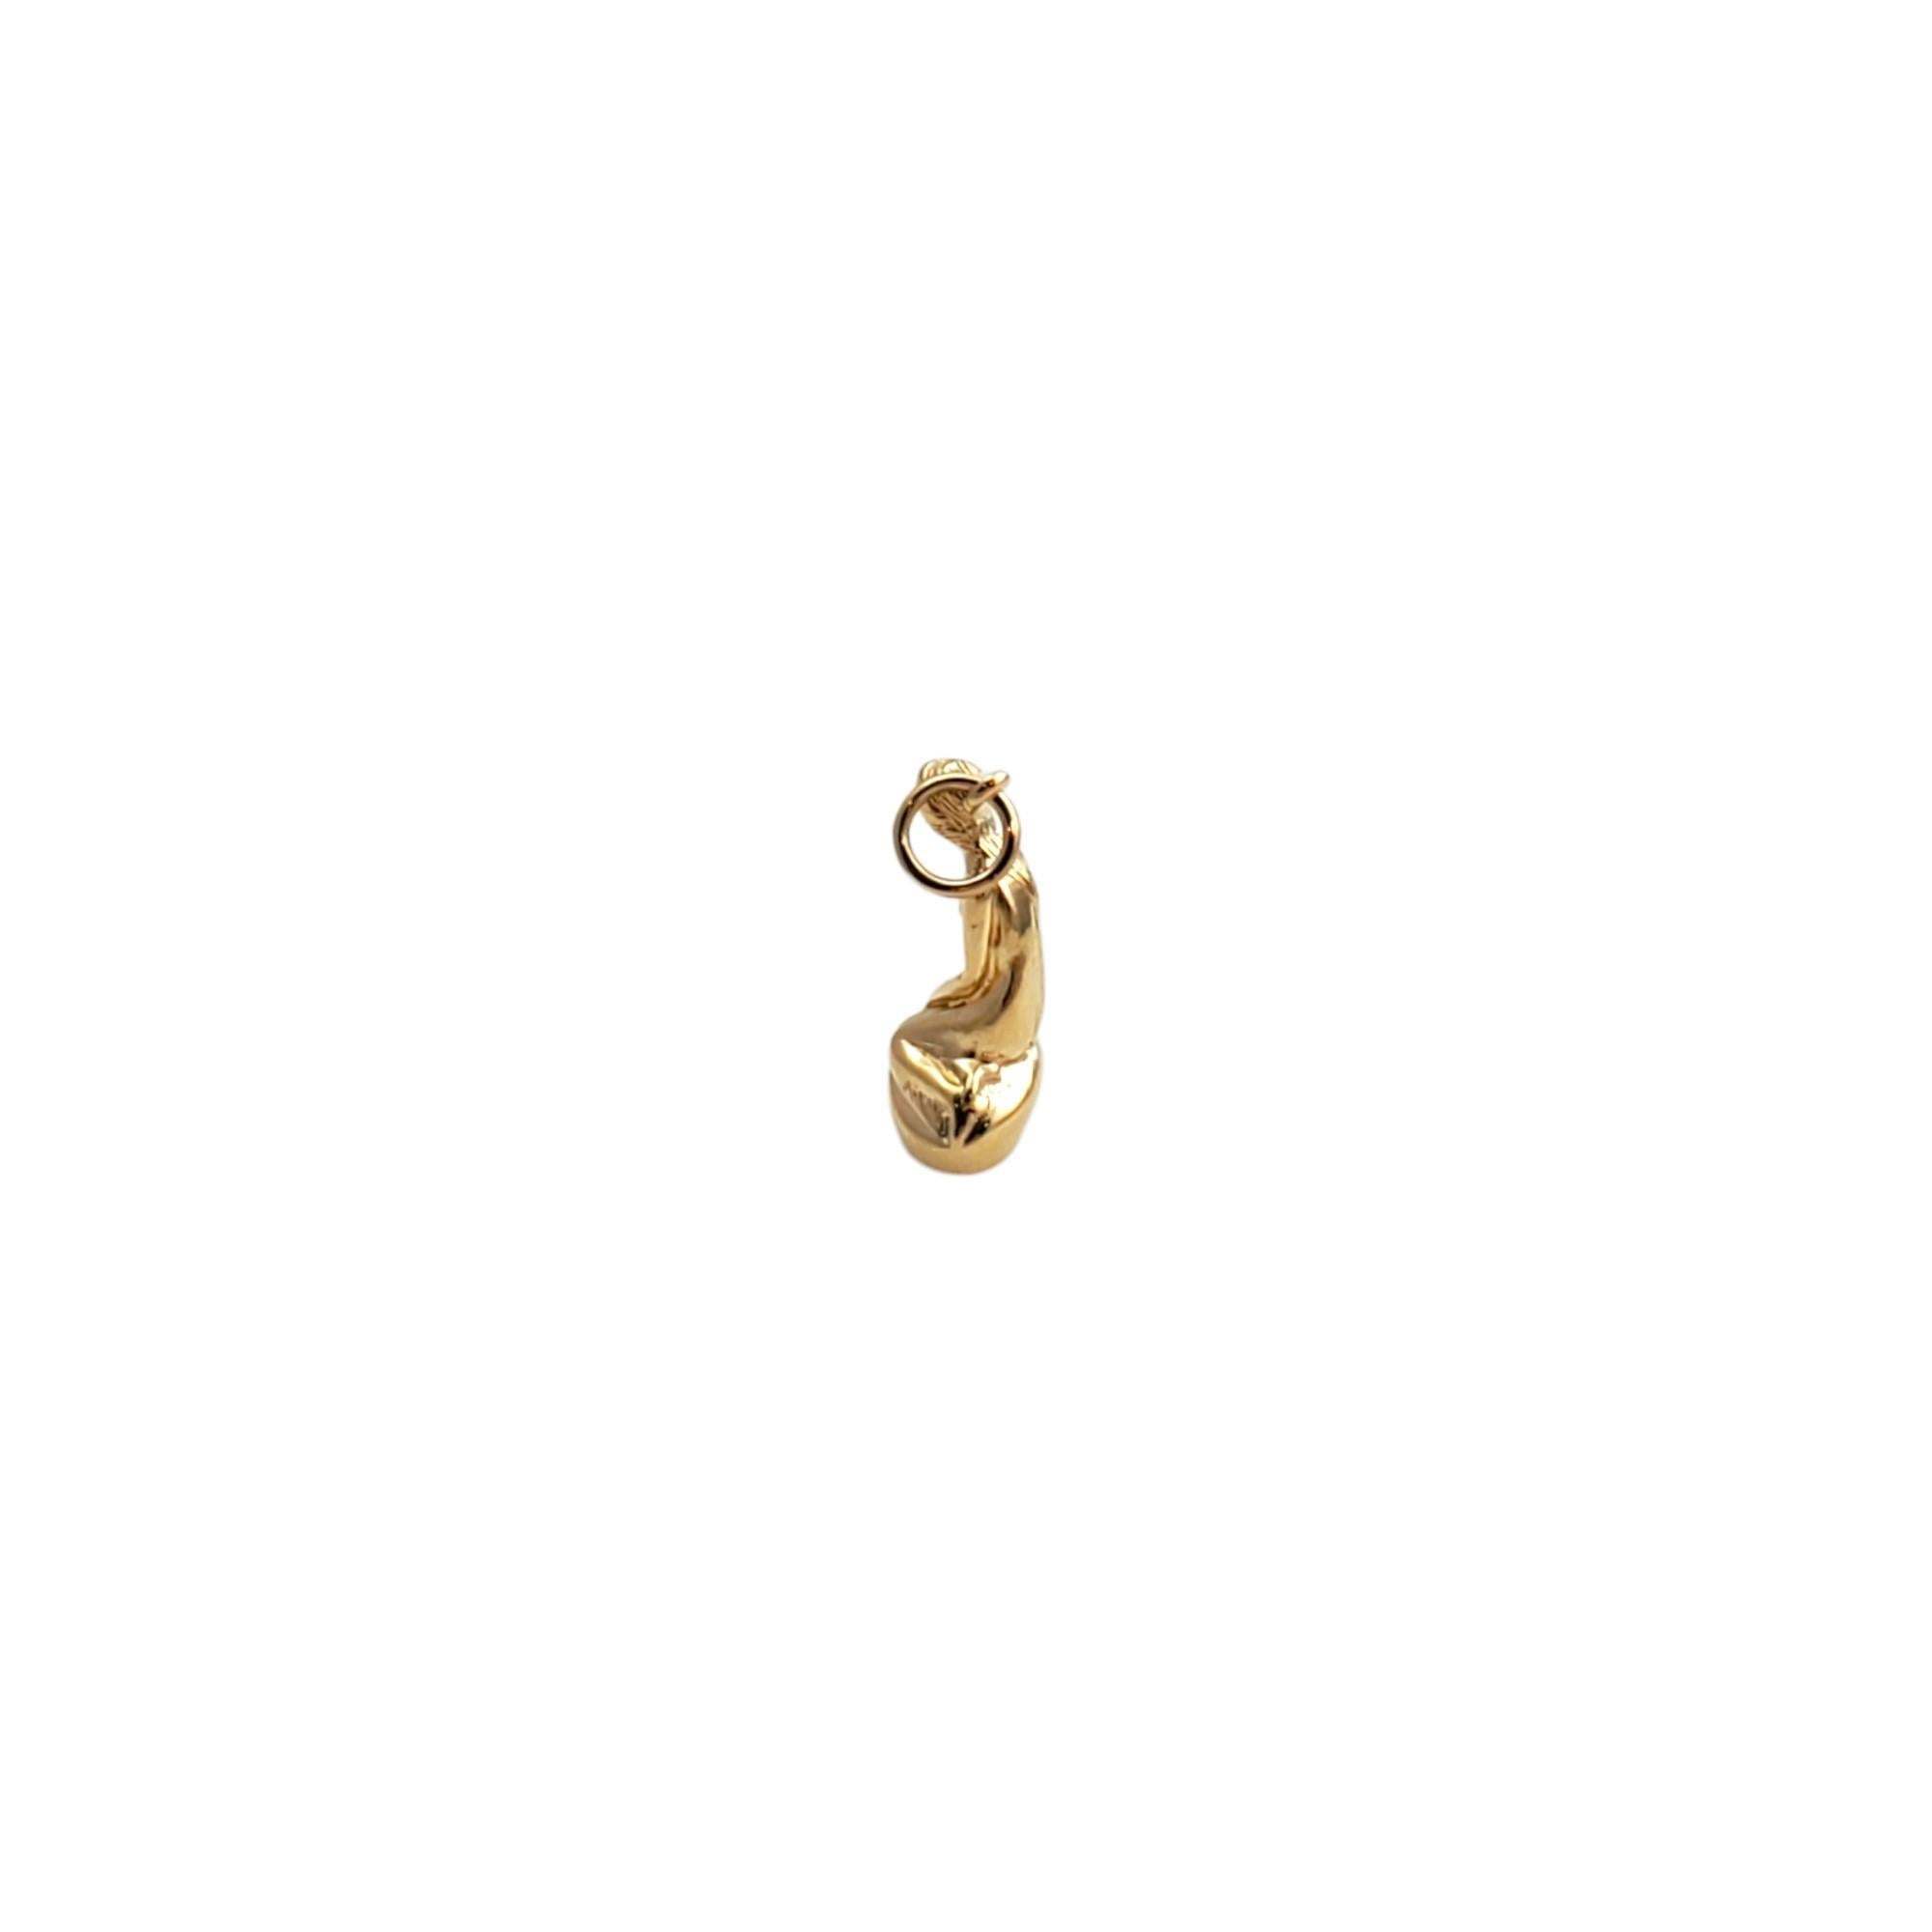  14K Yellow Gold Denmark Mermaid Charm #16011 In Good Condition For Sale In Washington Depot, CT